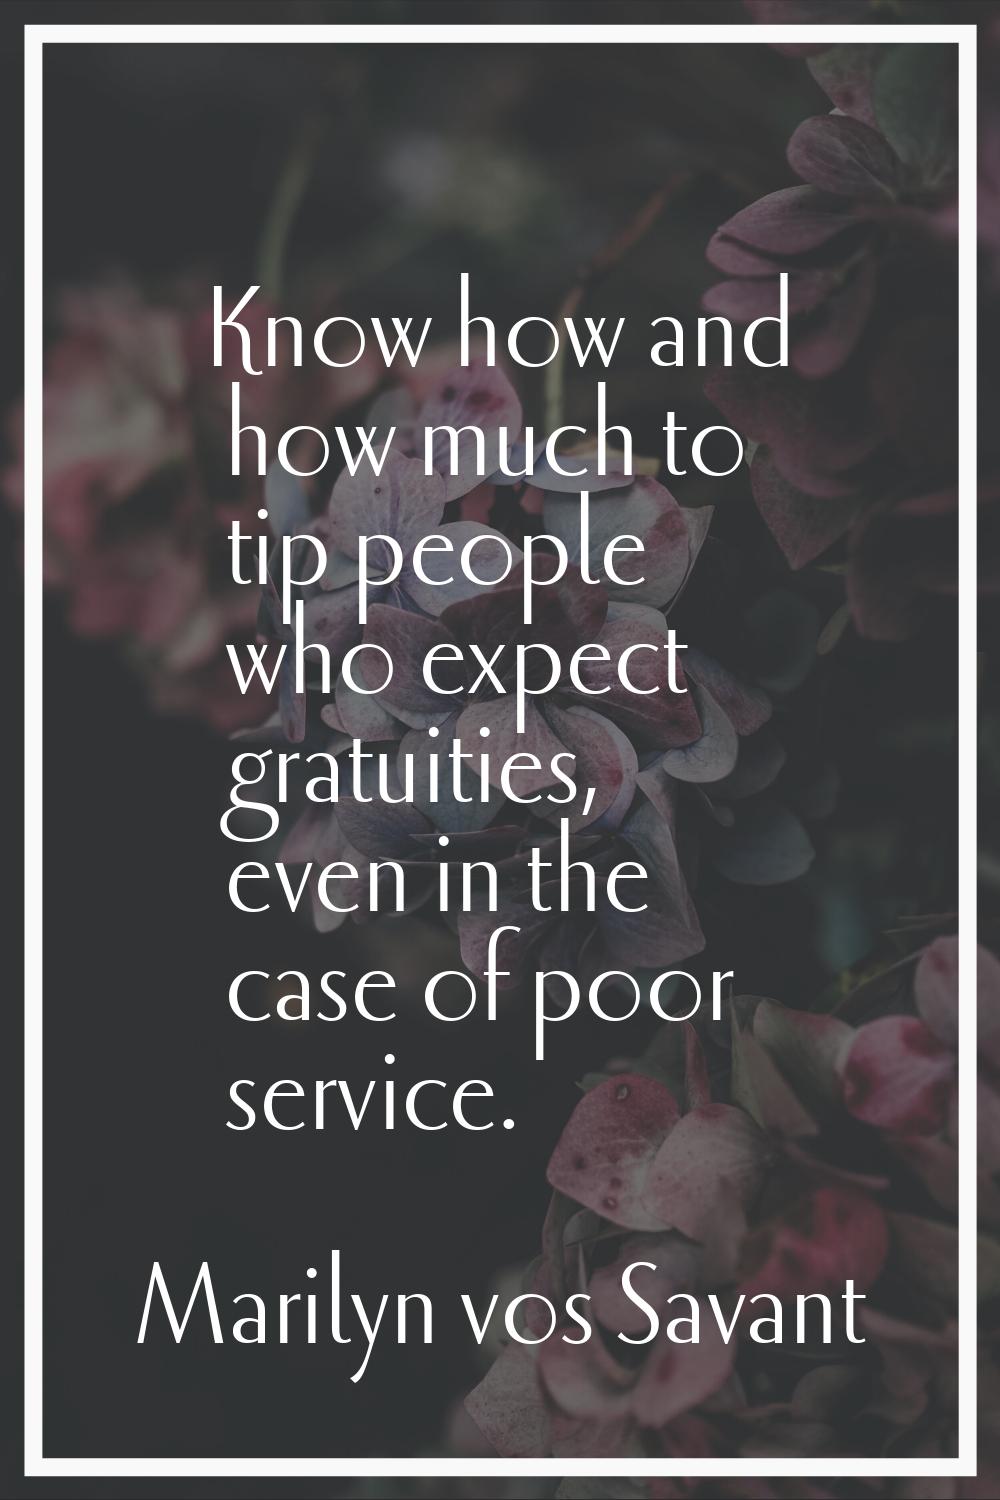 Know how and how much to tip people who expect gratuities, even in the case of poor service.